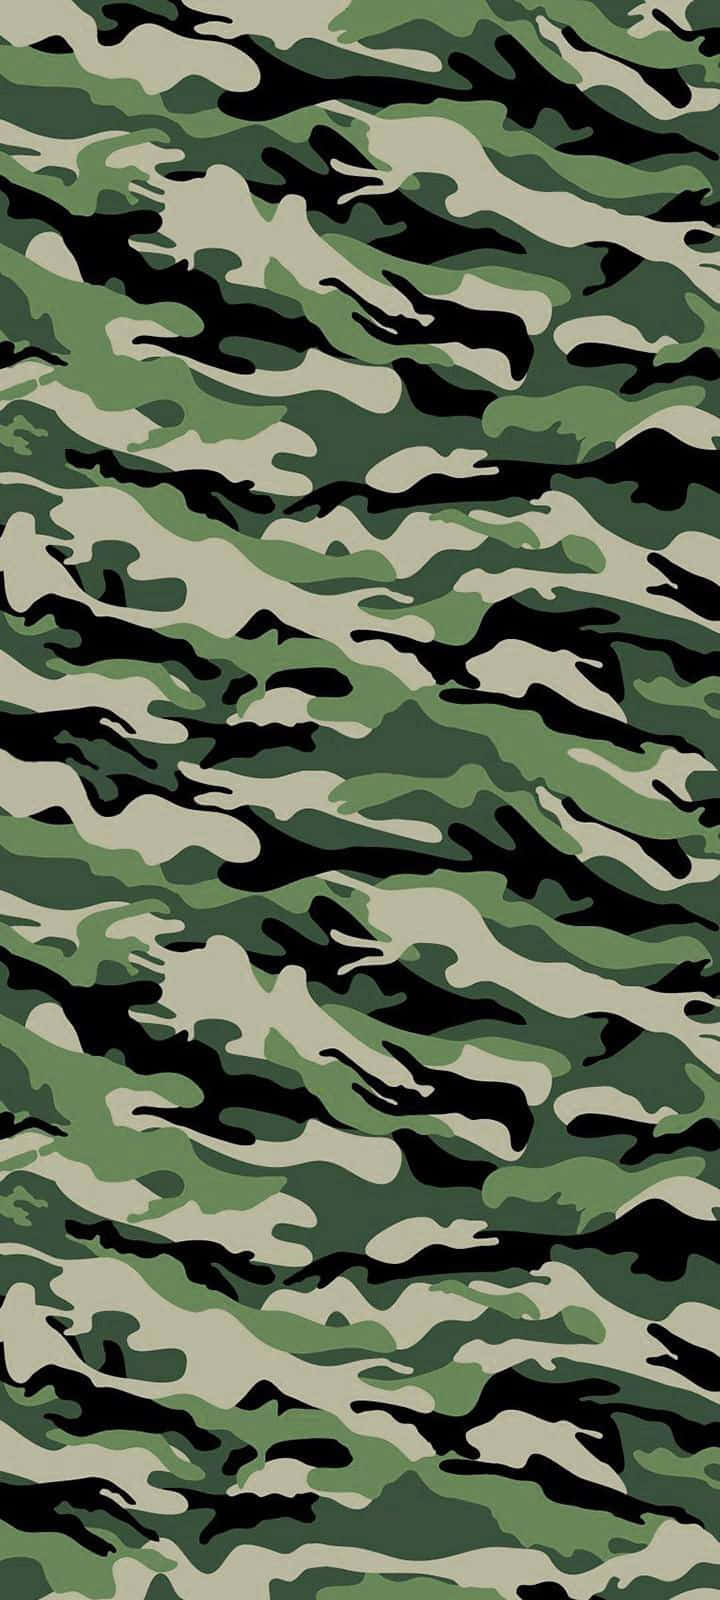 Premium Vector  Texture military camouflage army green hunting camouflage  military background vector illustration